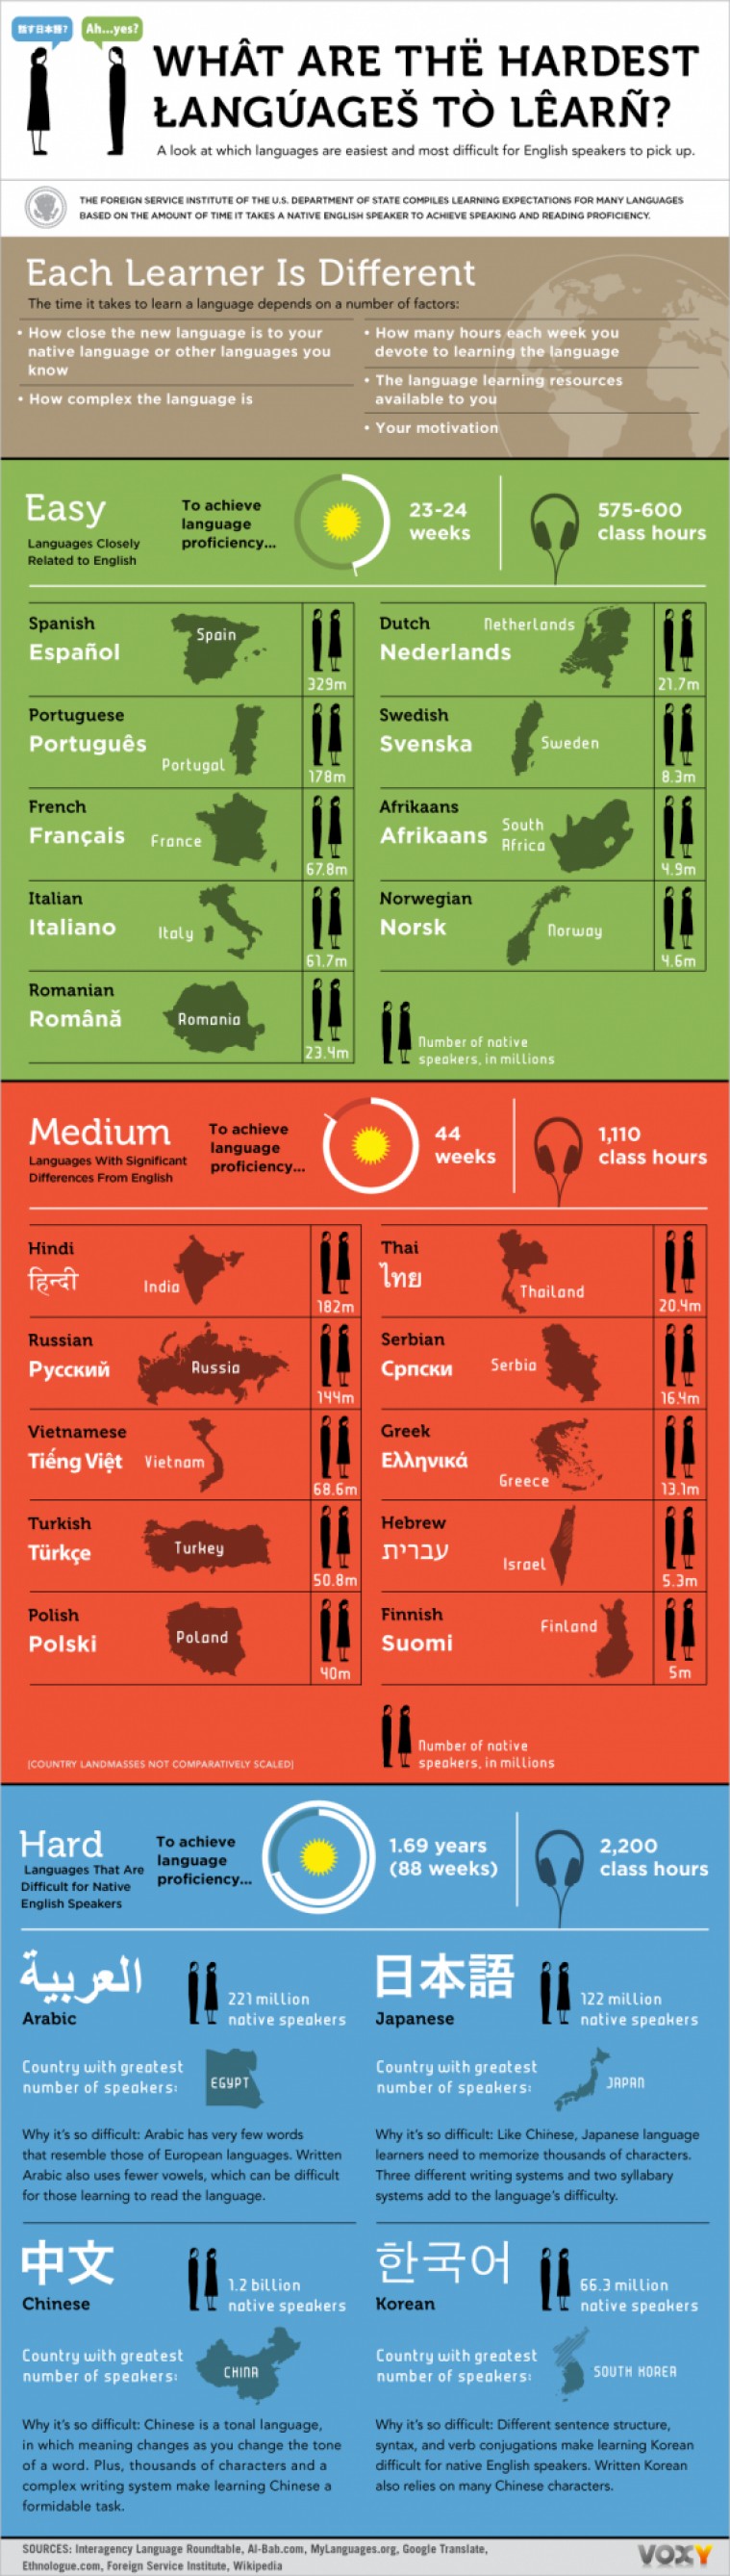 What Are The Hardest Languages to Learn?